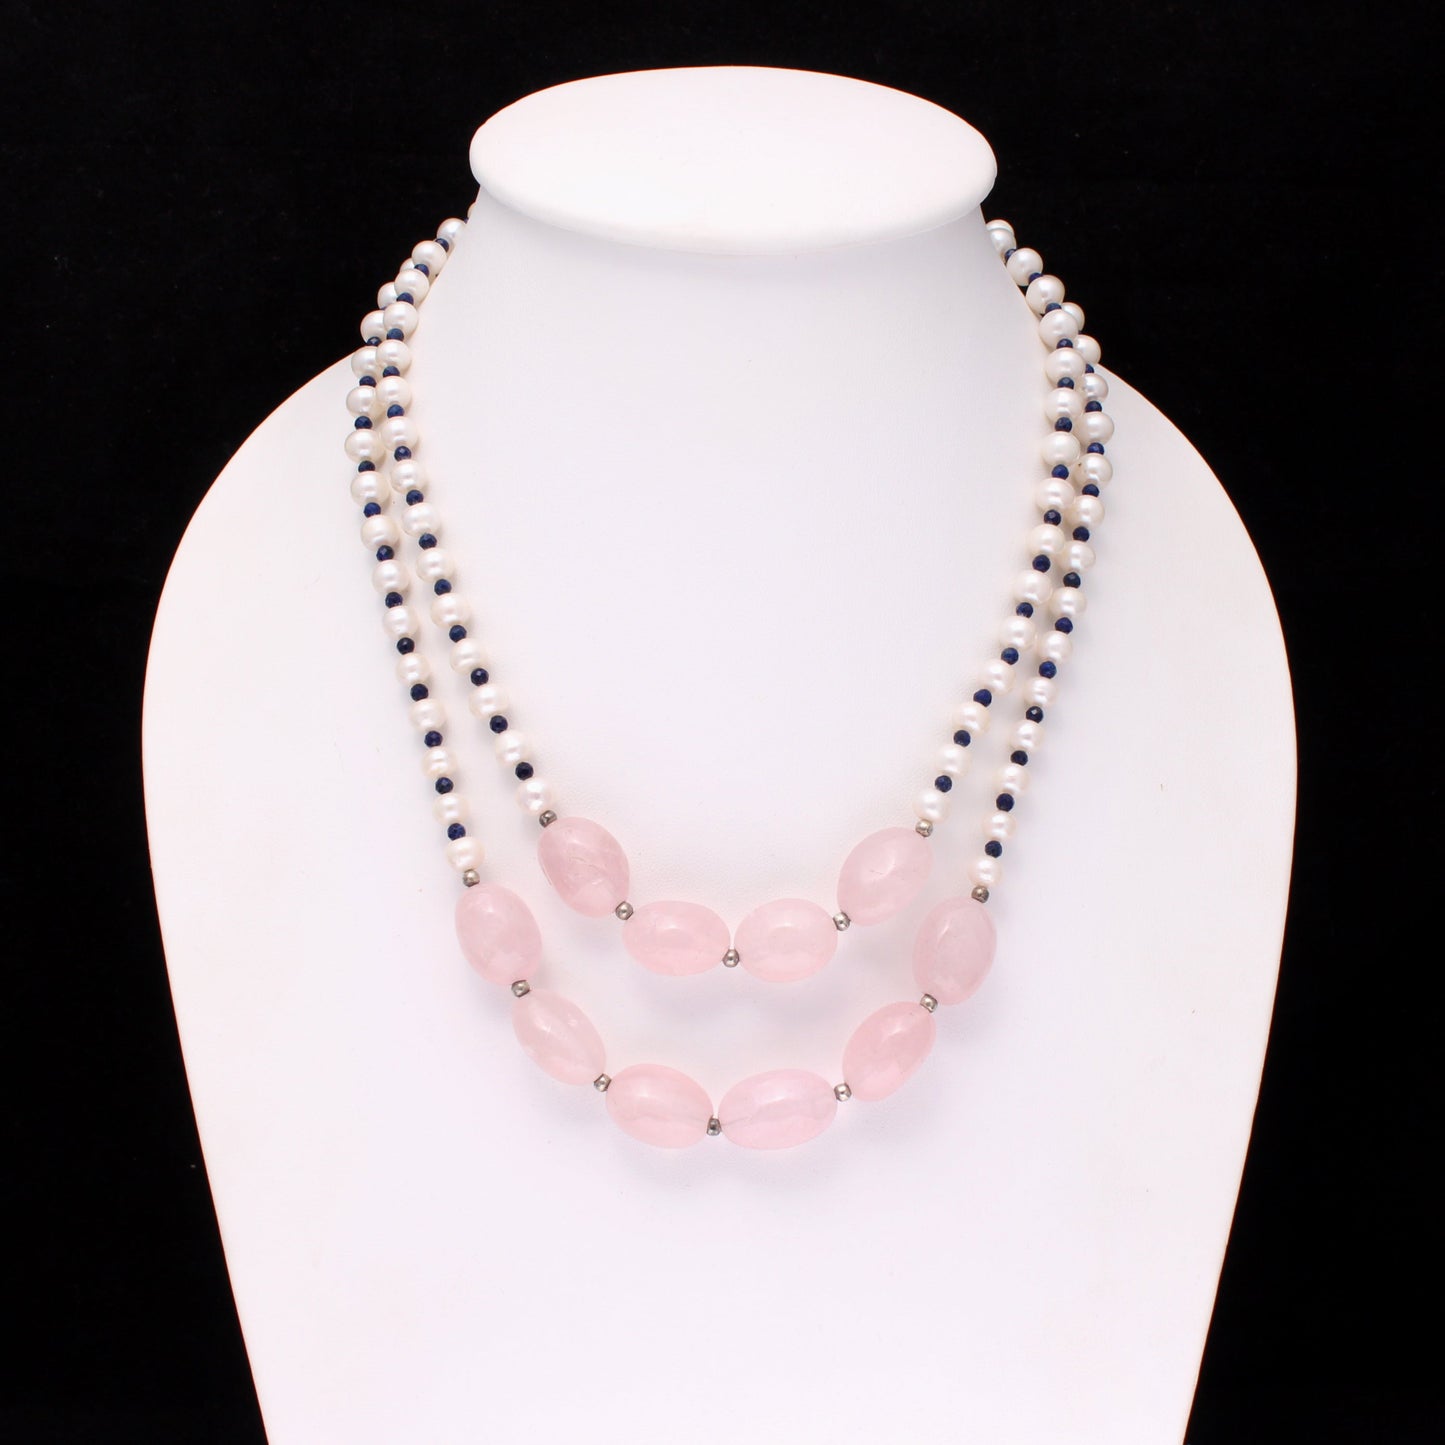 Multi Beaded 2 Layer Silver Necklace GemsRush